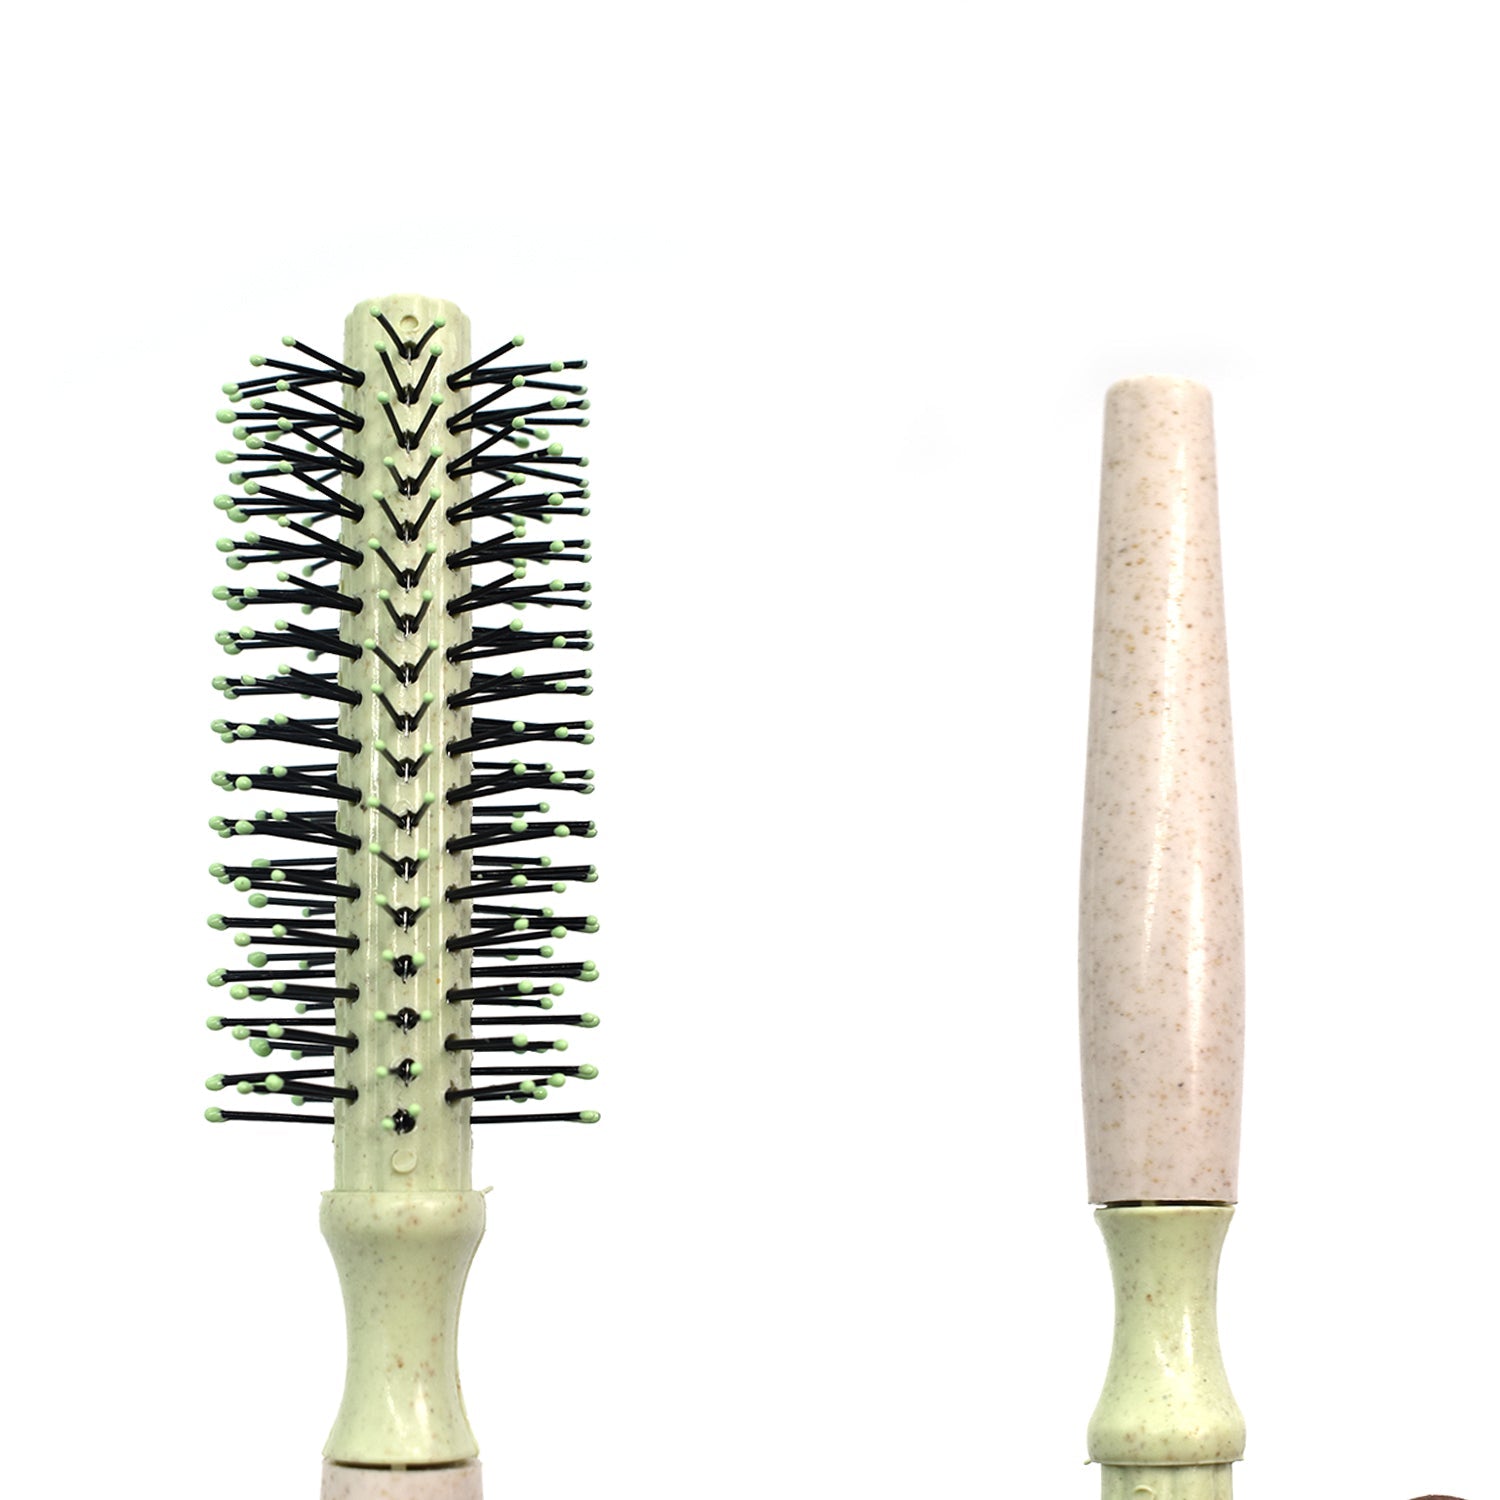 6191 Round Hair Brush For Blow Drying & Hair Styling 